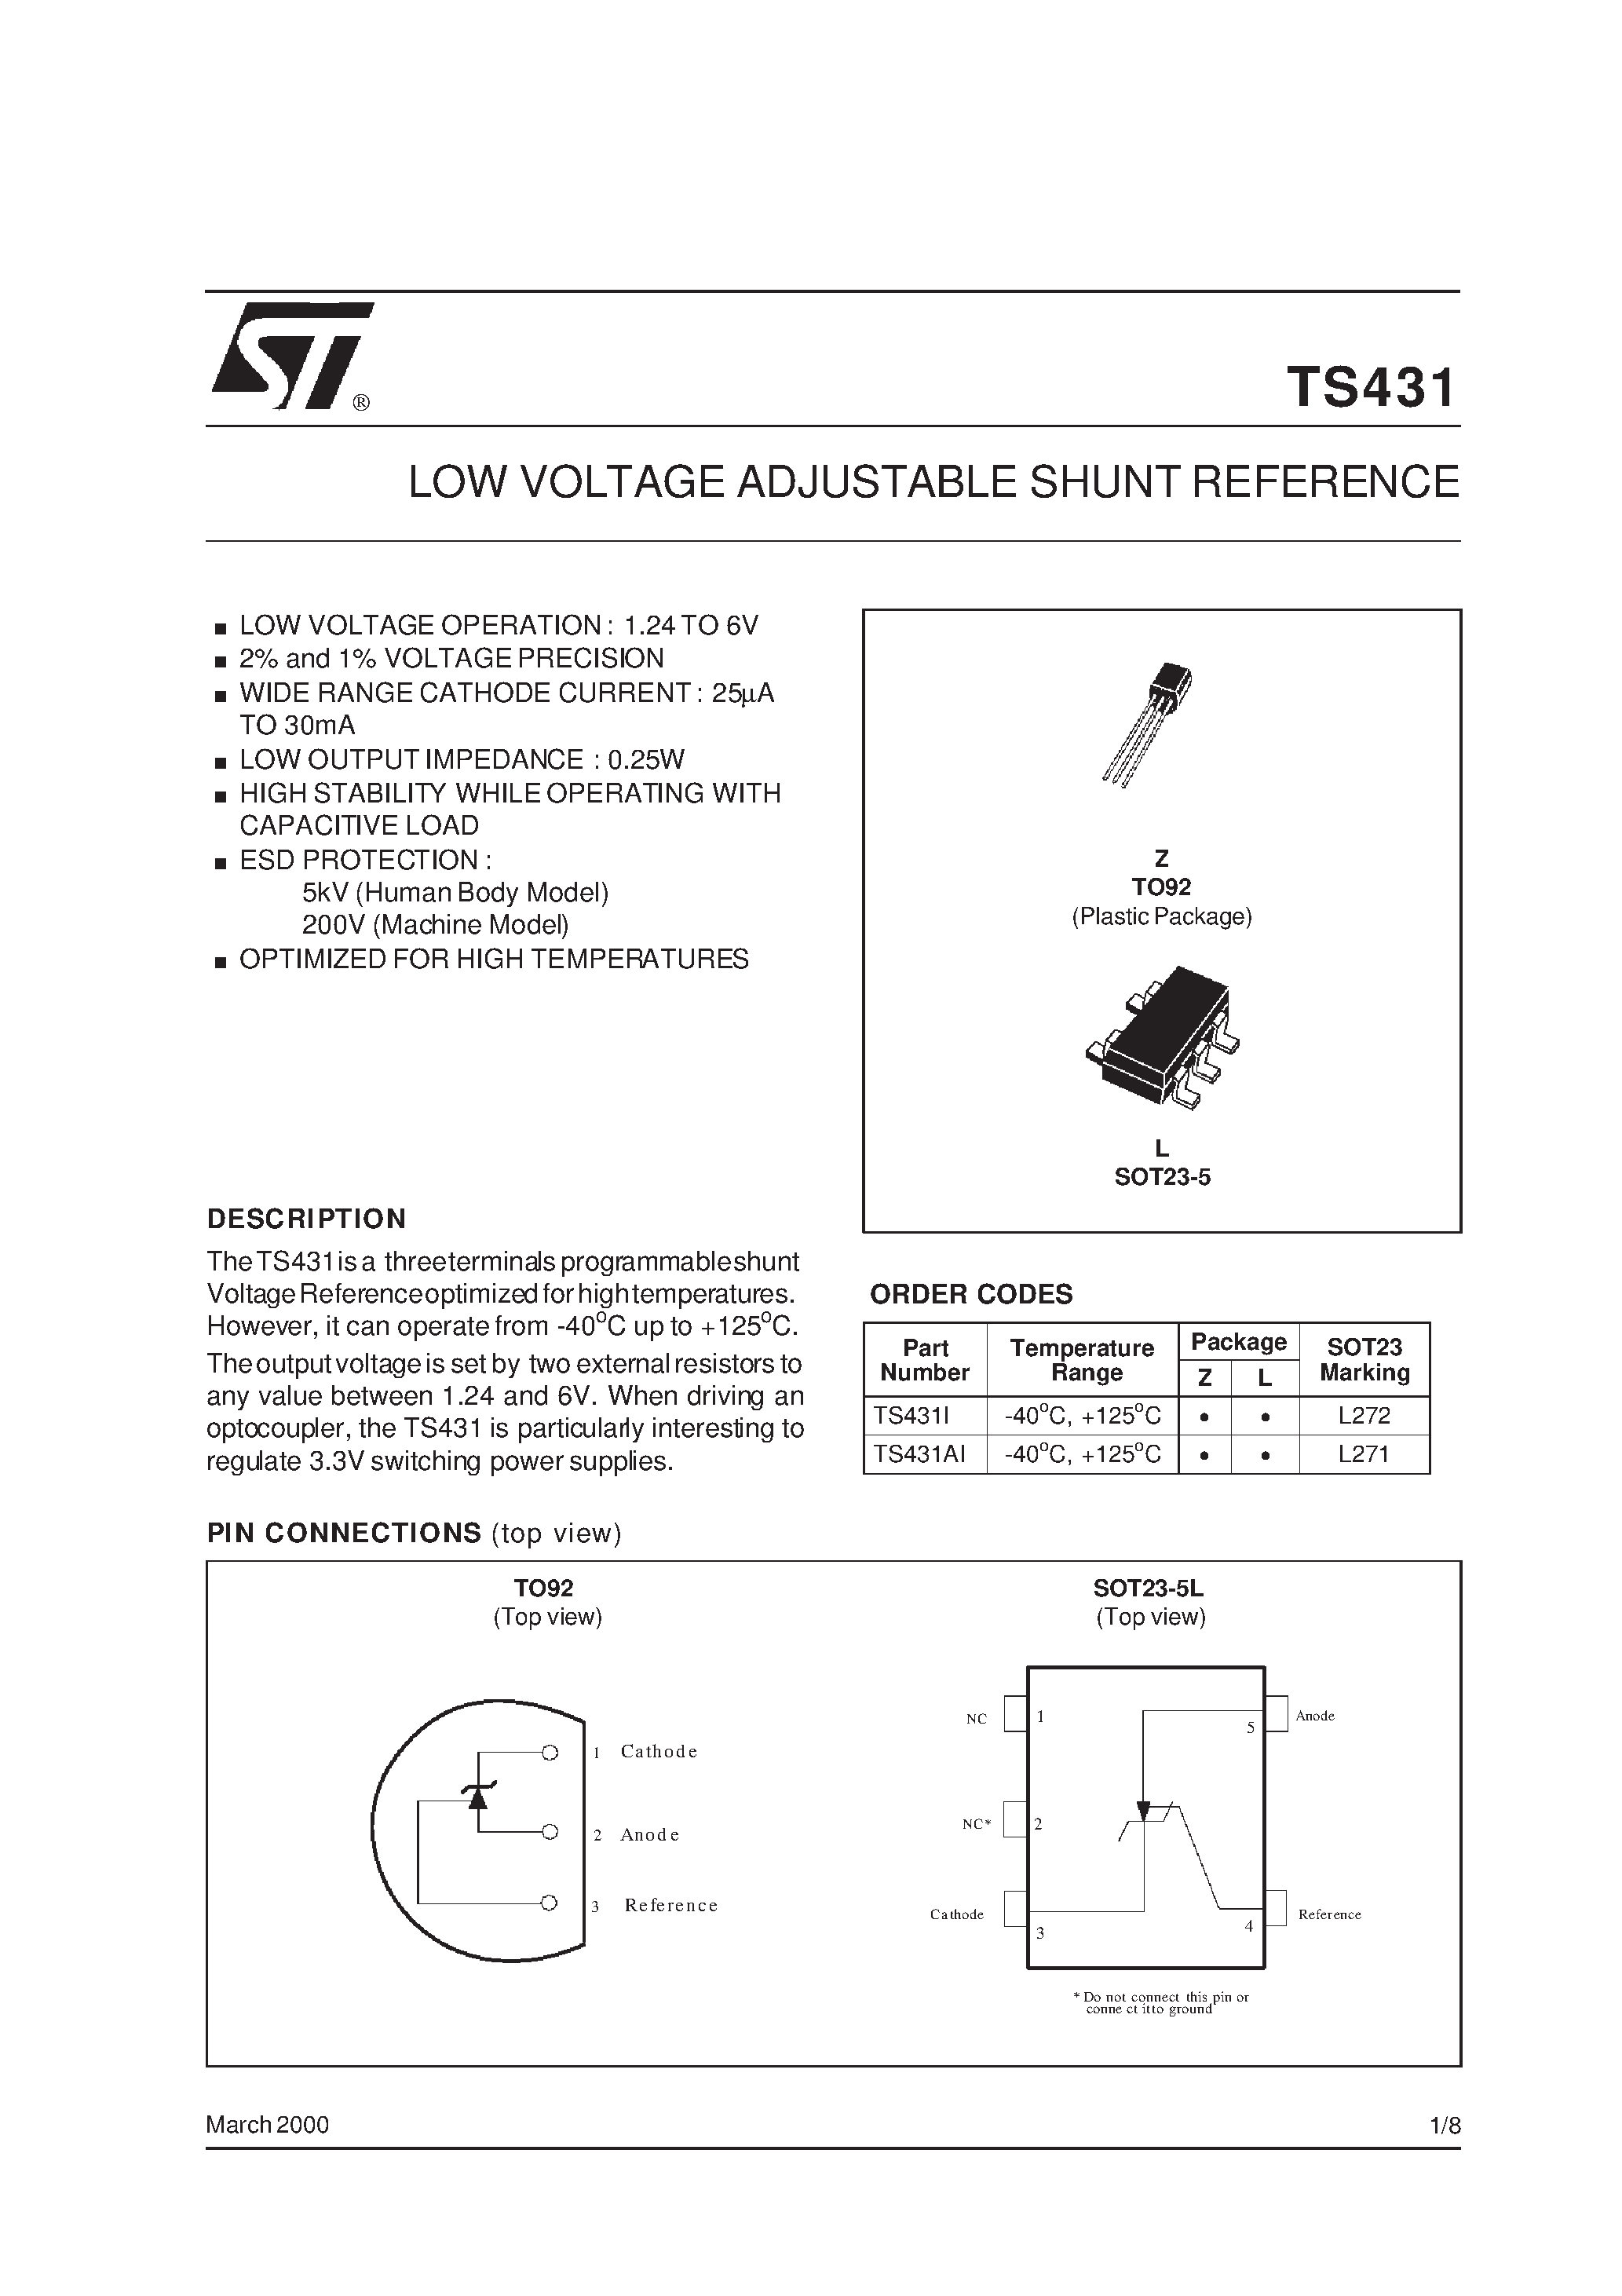 Datasheet TS431 - LOW VOLTAGE ADJUSTABLE SHUNT REFERENCE page 1